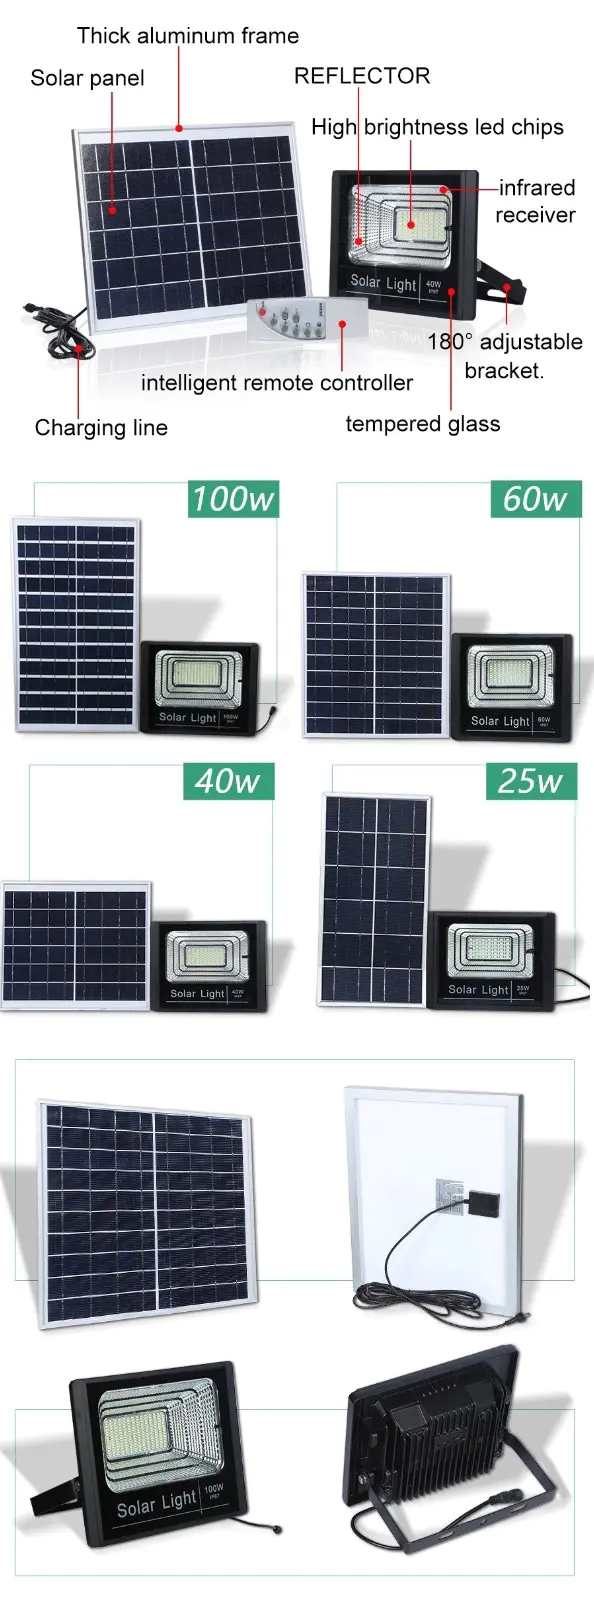 Litel Technology reasonable price solar led flood light inquire now for warehouse